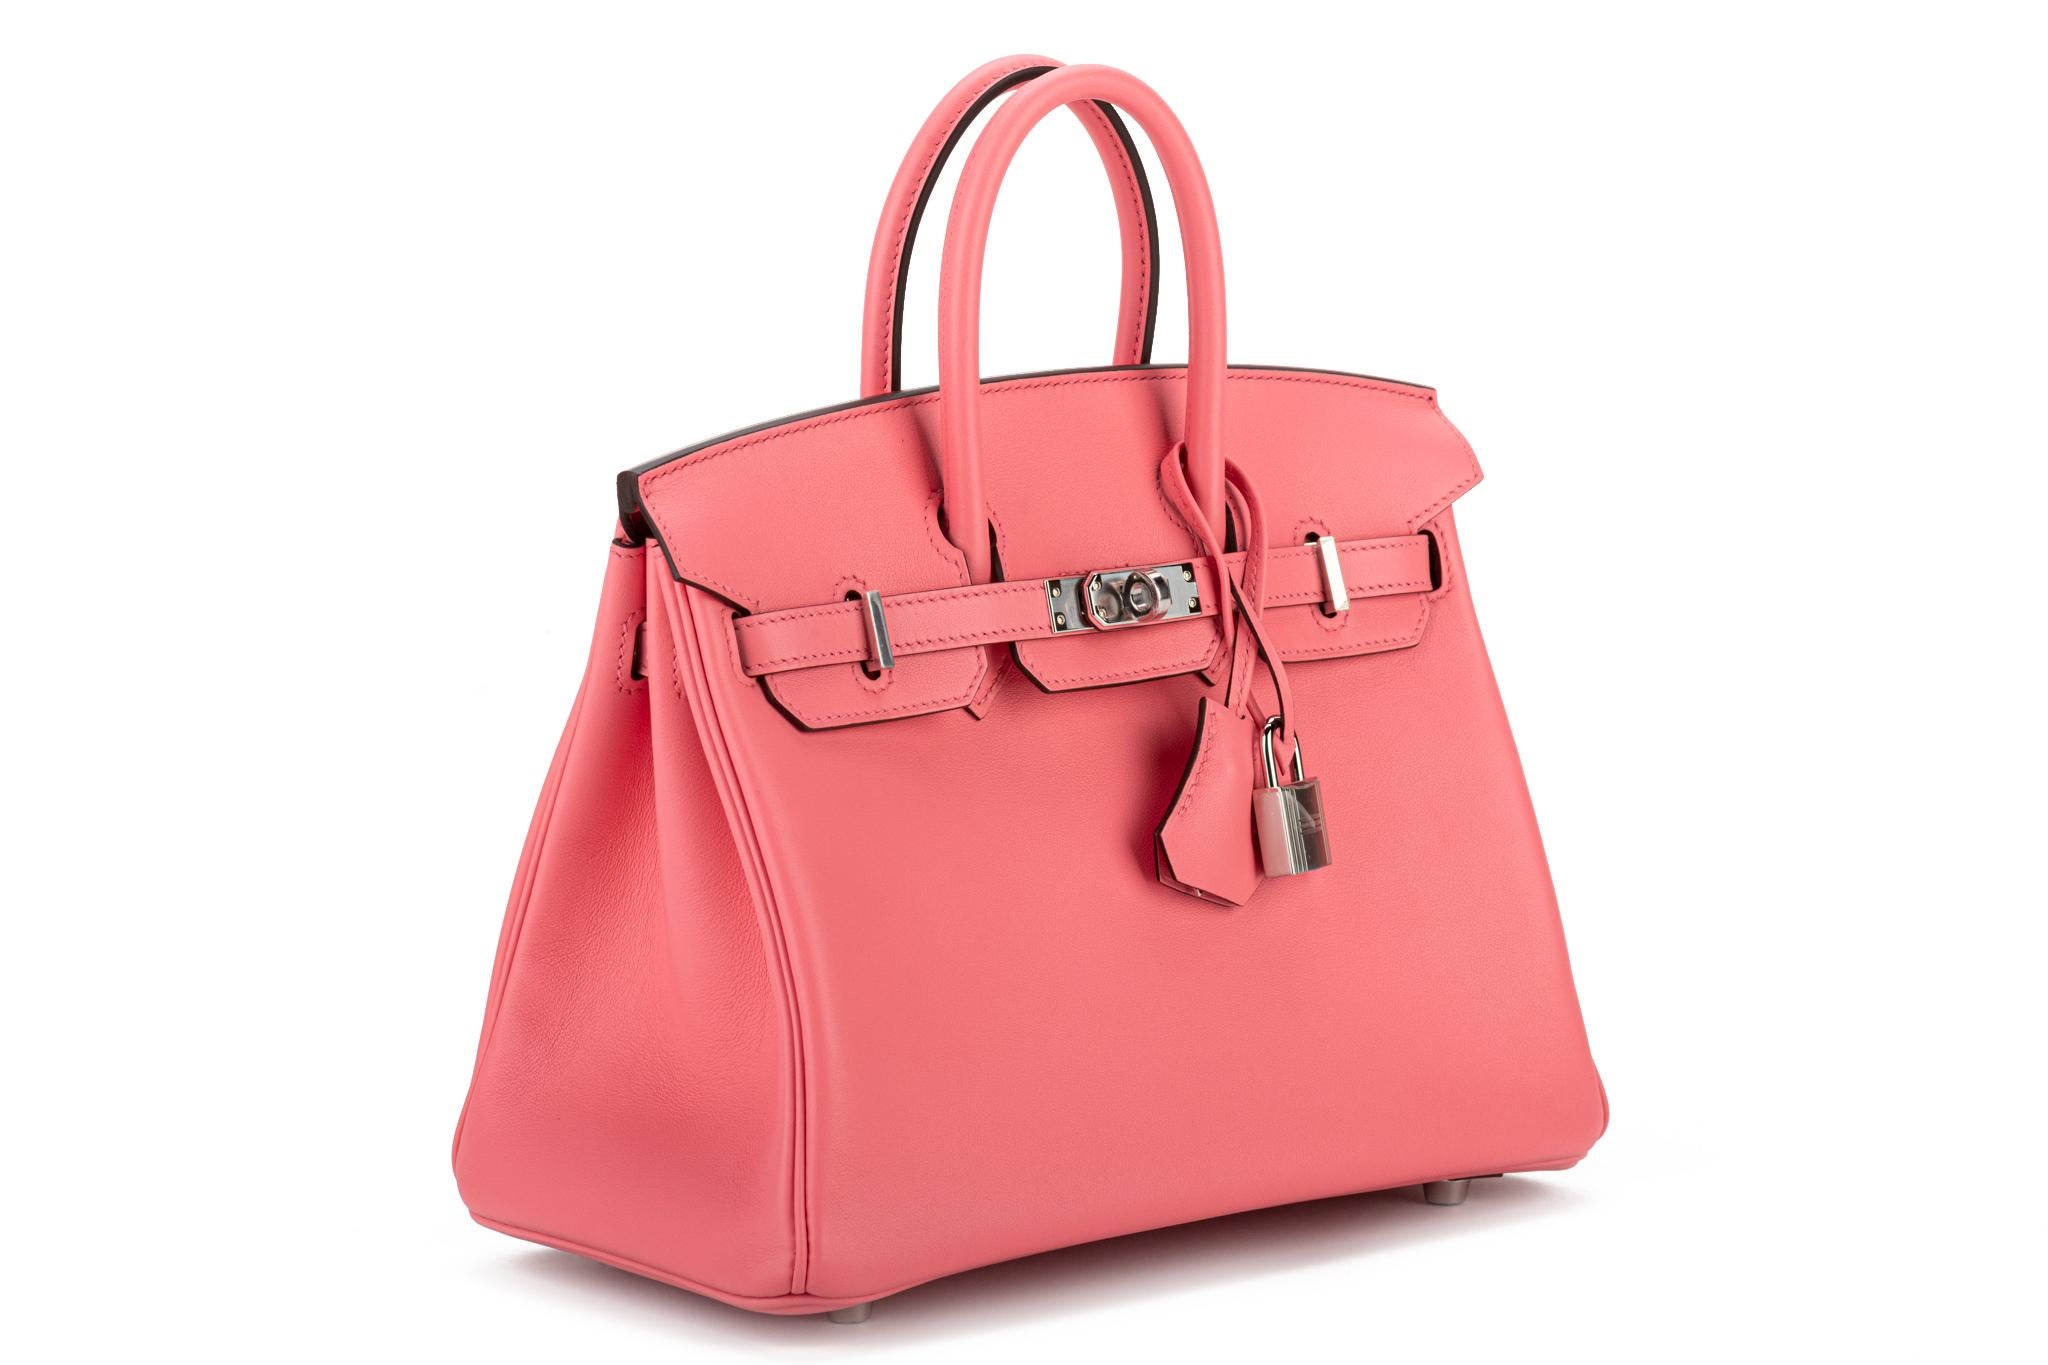 Hermès 25cm Birkin in rose d'ete' swift leather with palladium hardware. Rare and collectible. Handle drop, 3